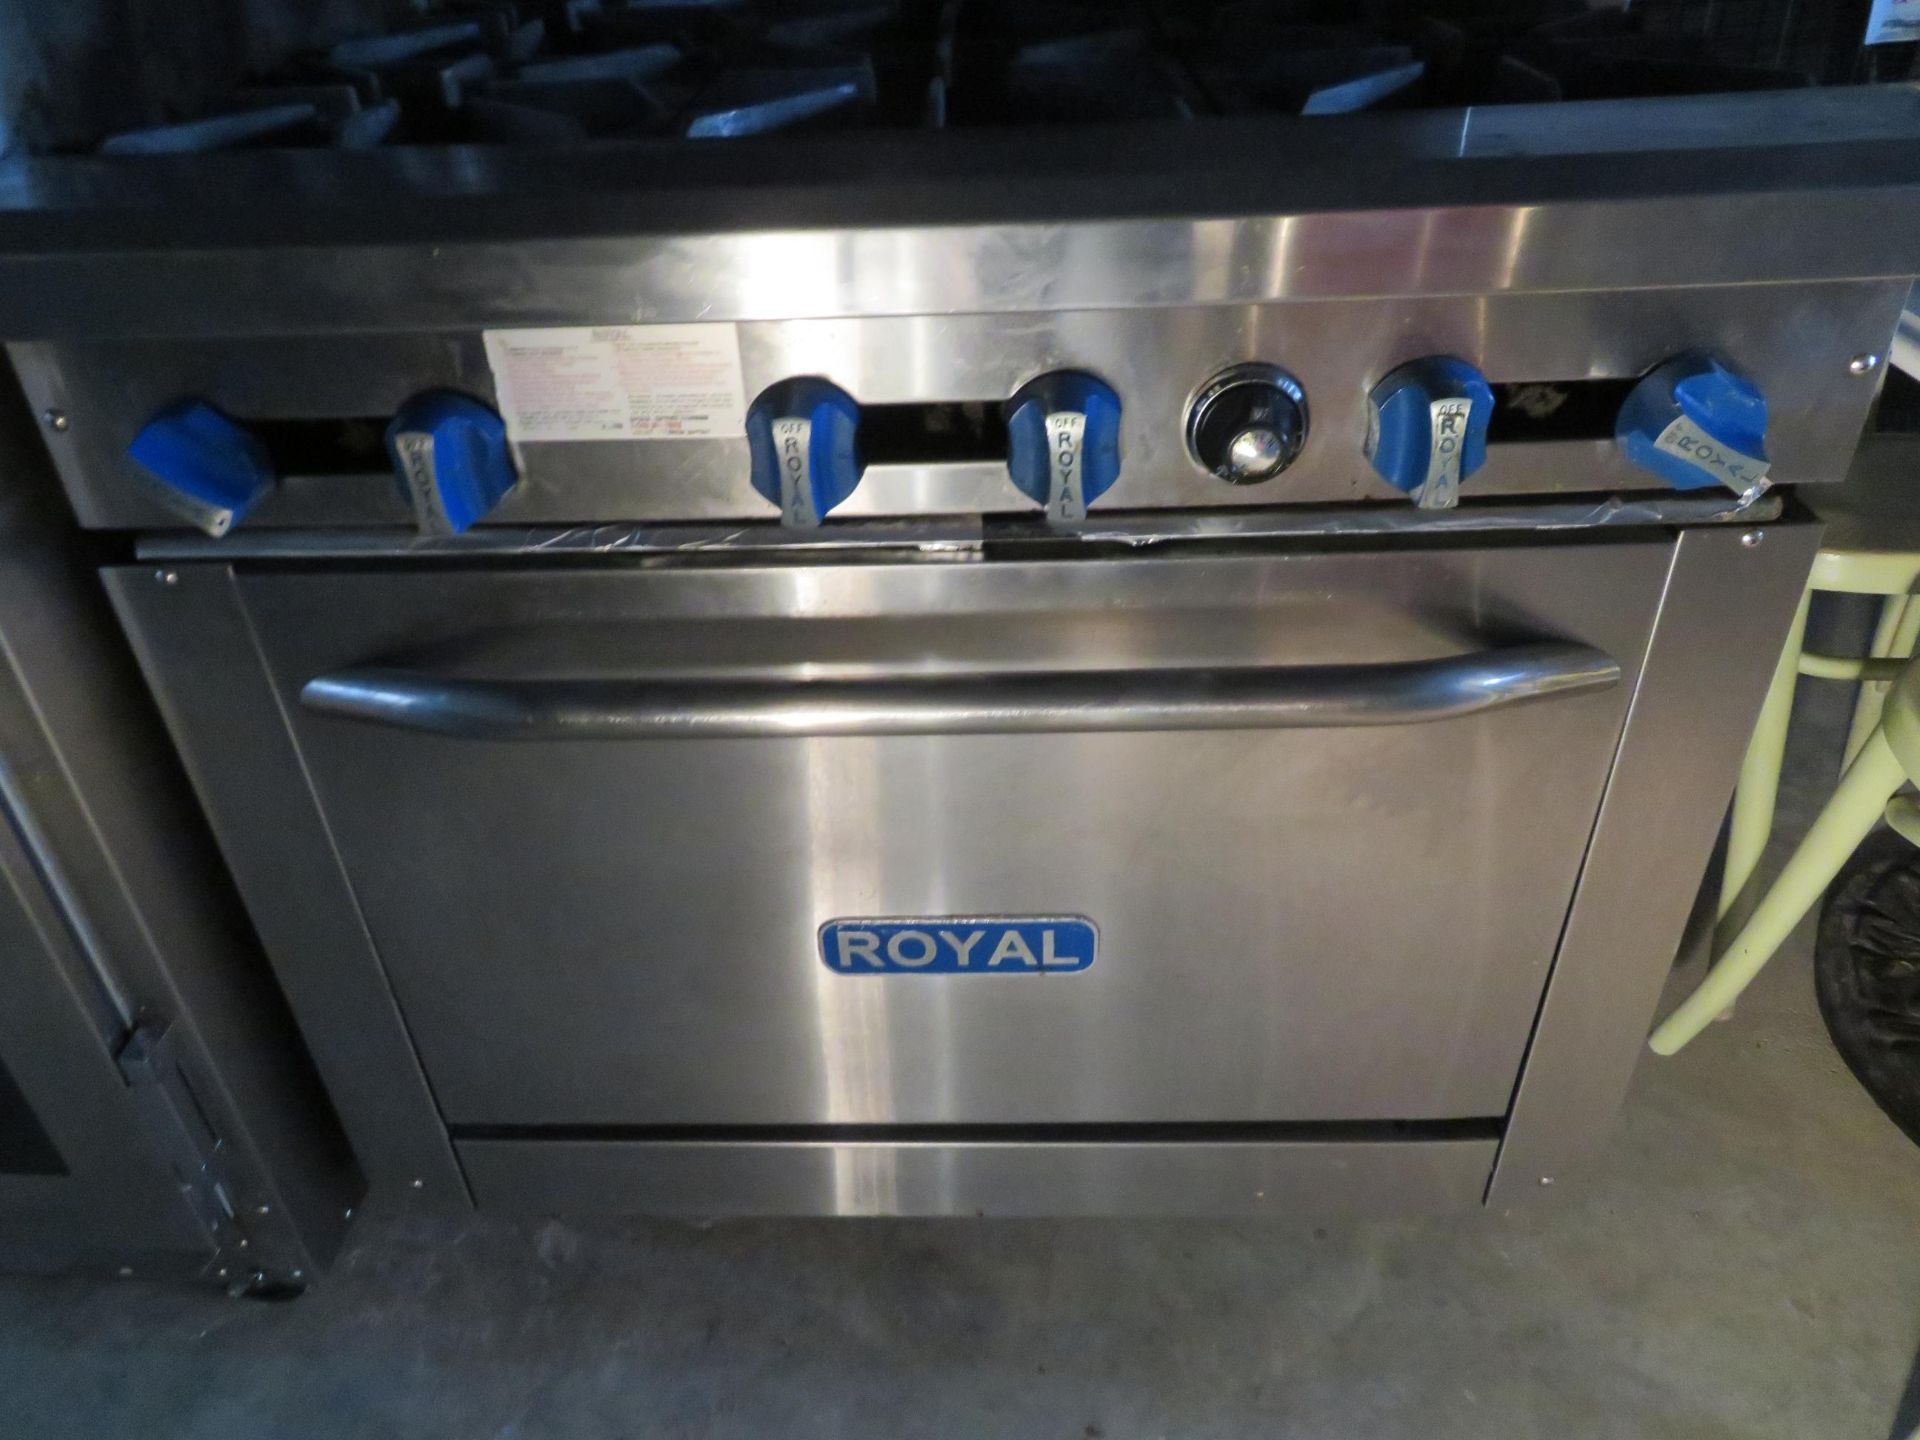 ROYAL 6 burner stove approx. 36"w x 32"d x 36"h - Image 3 of 4